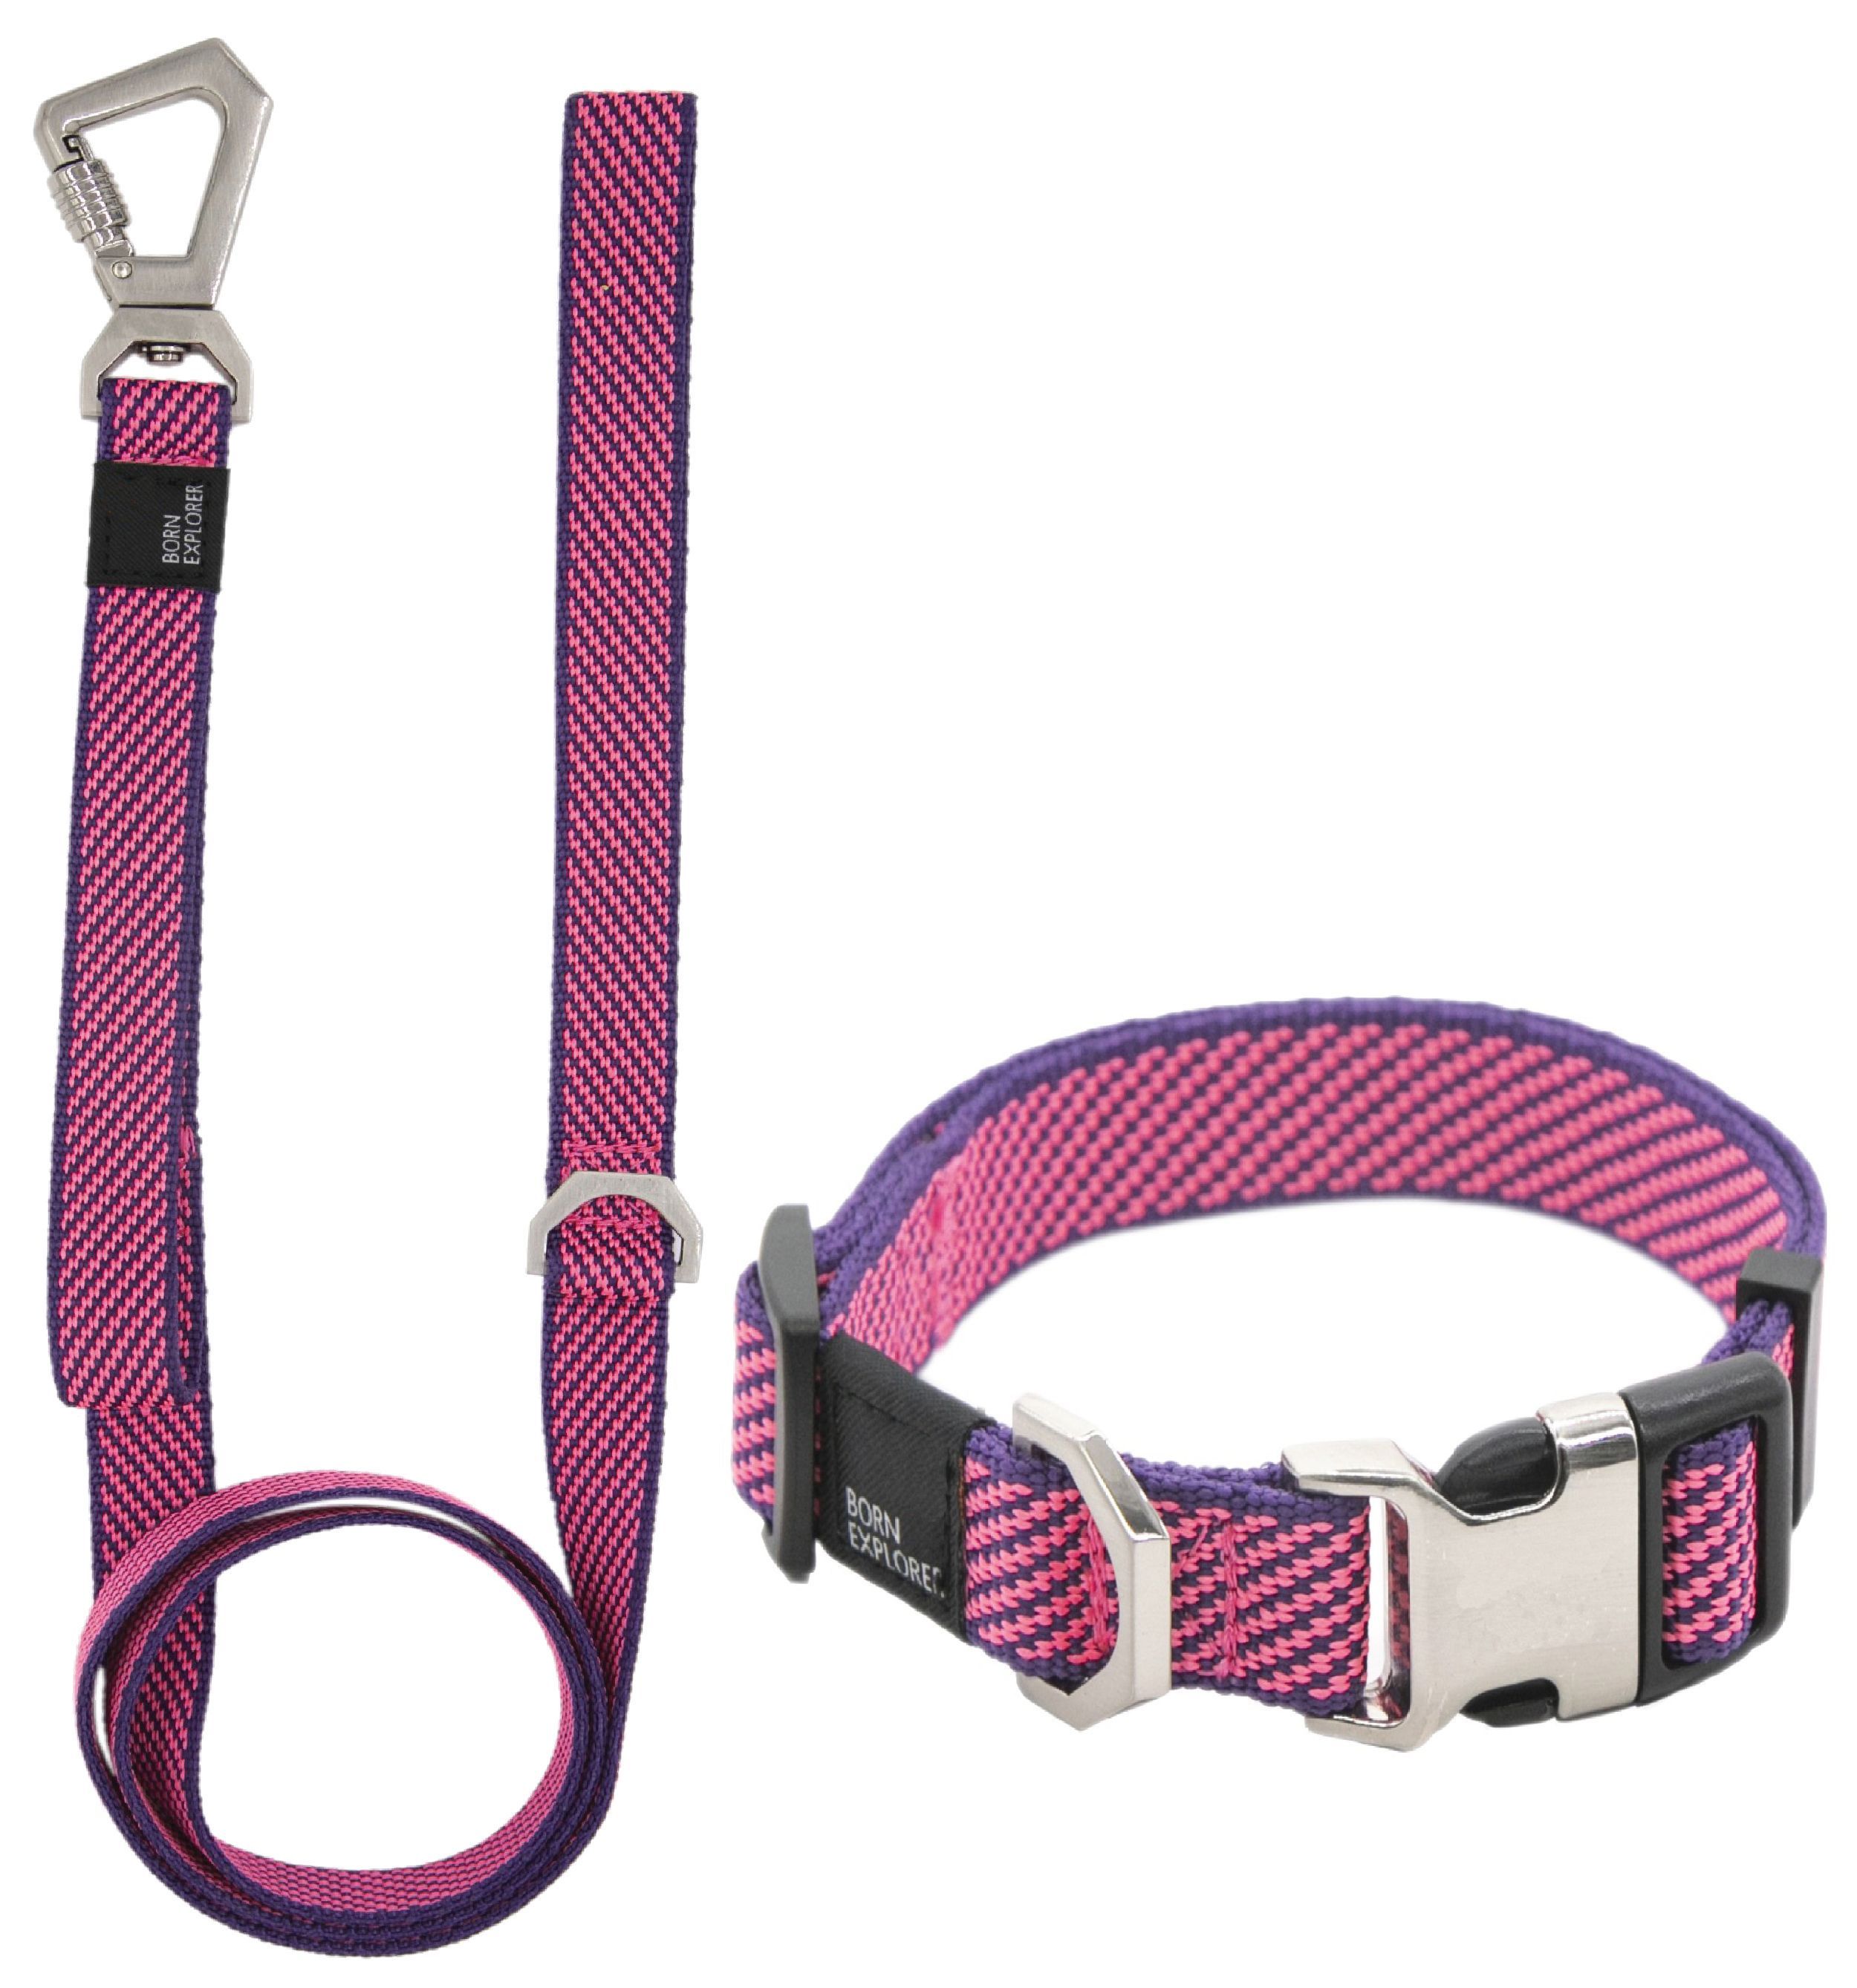 Pet Life ® 'Escapade' Outdoor Series 2-in-1 Convertible Dog Leash and Collar Pink Small